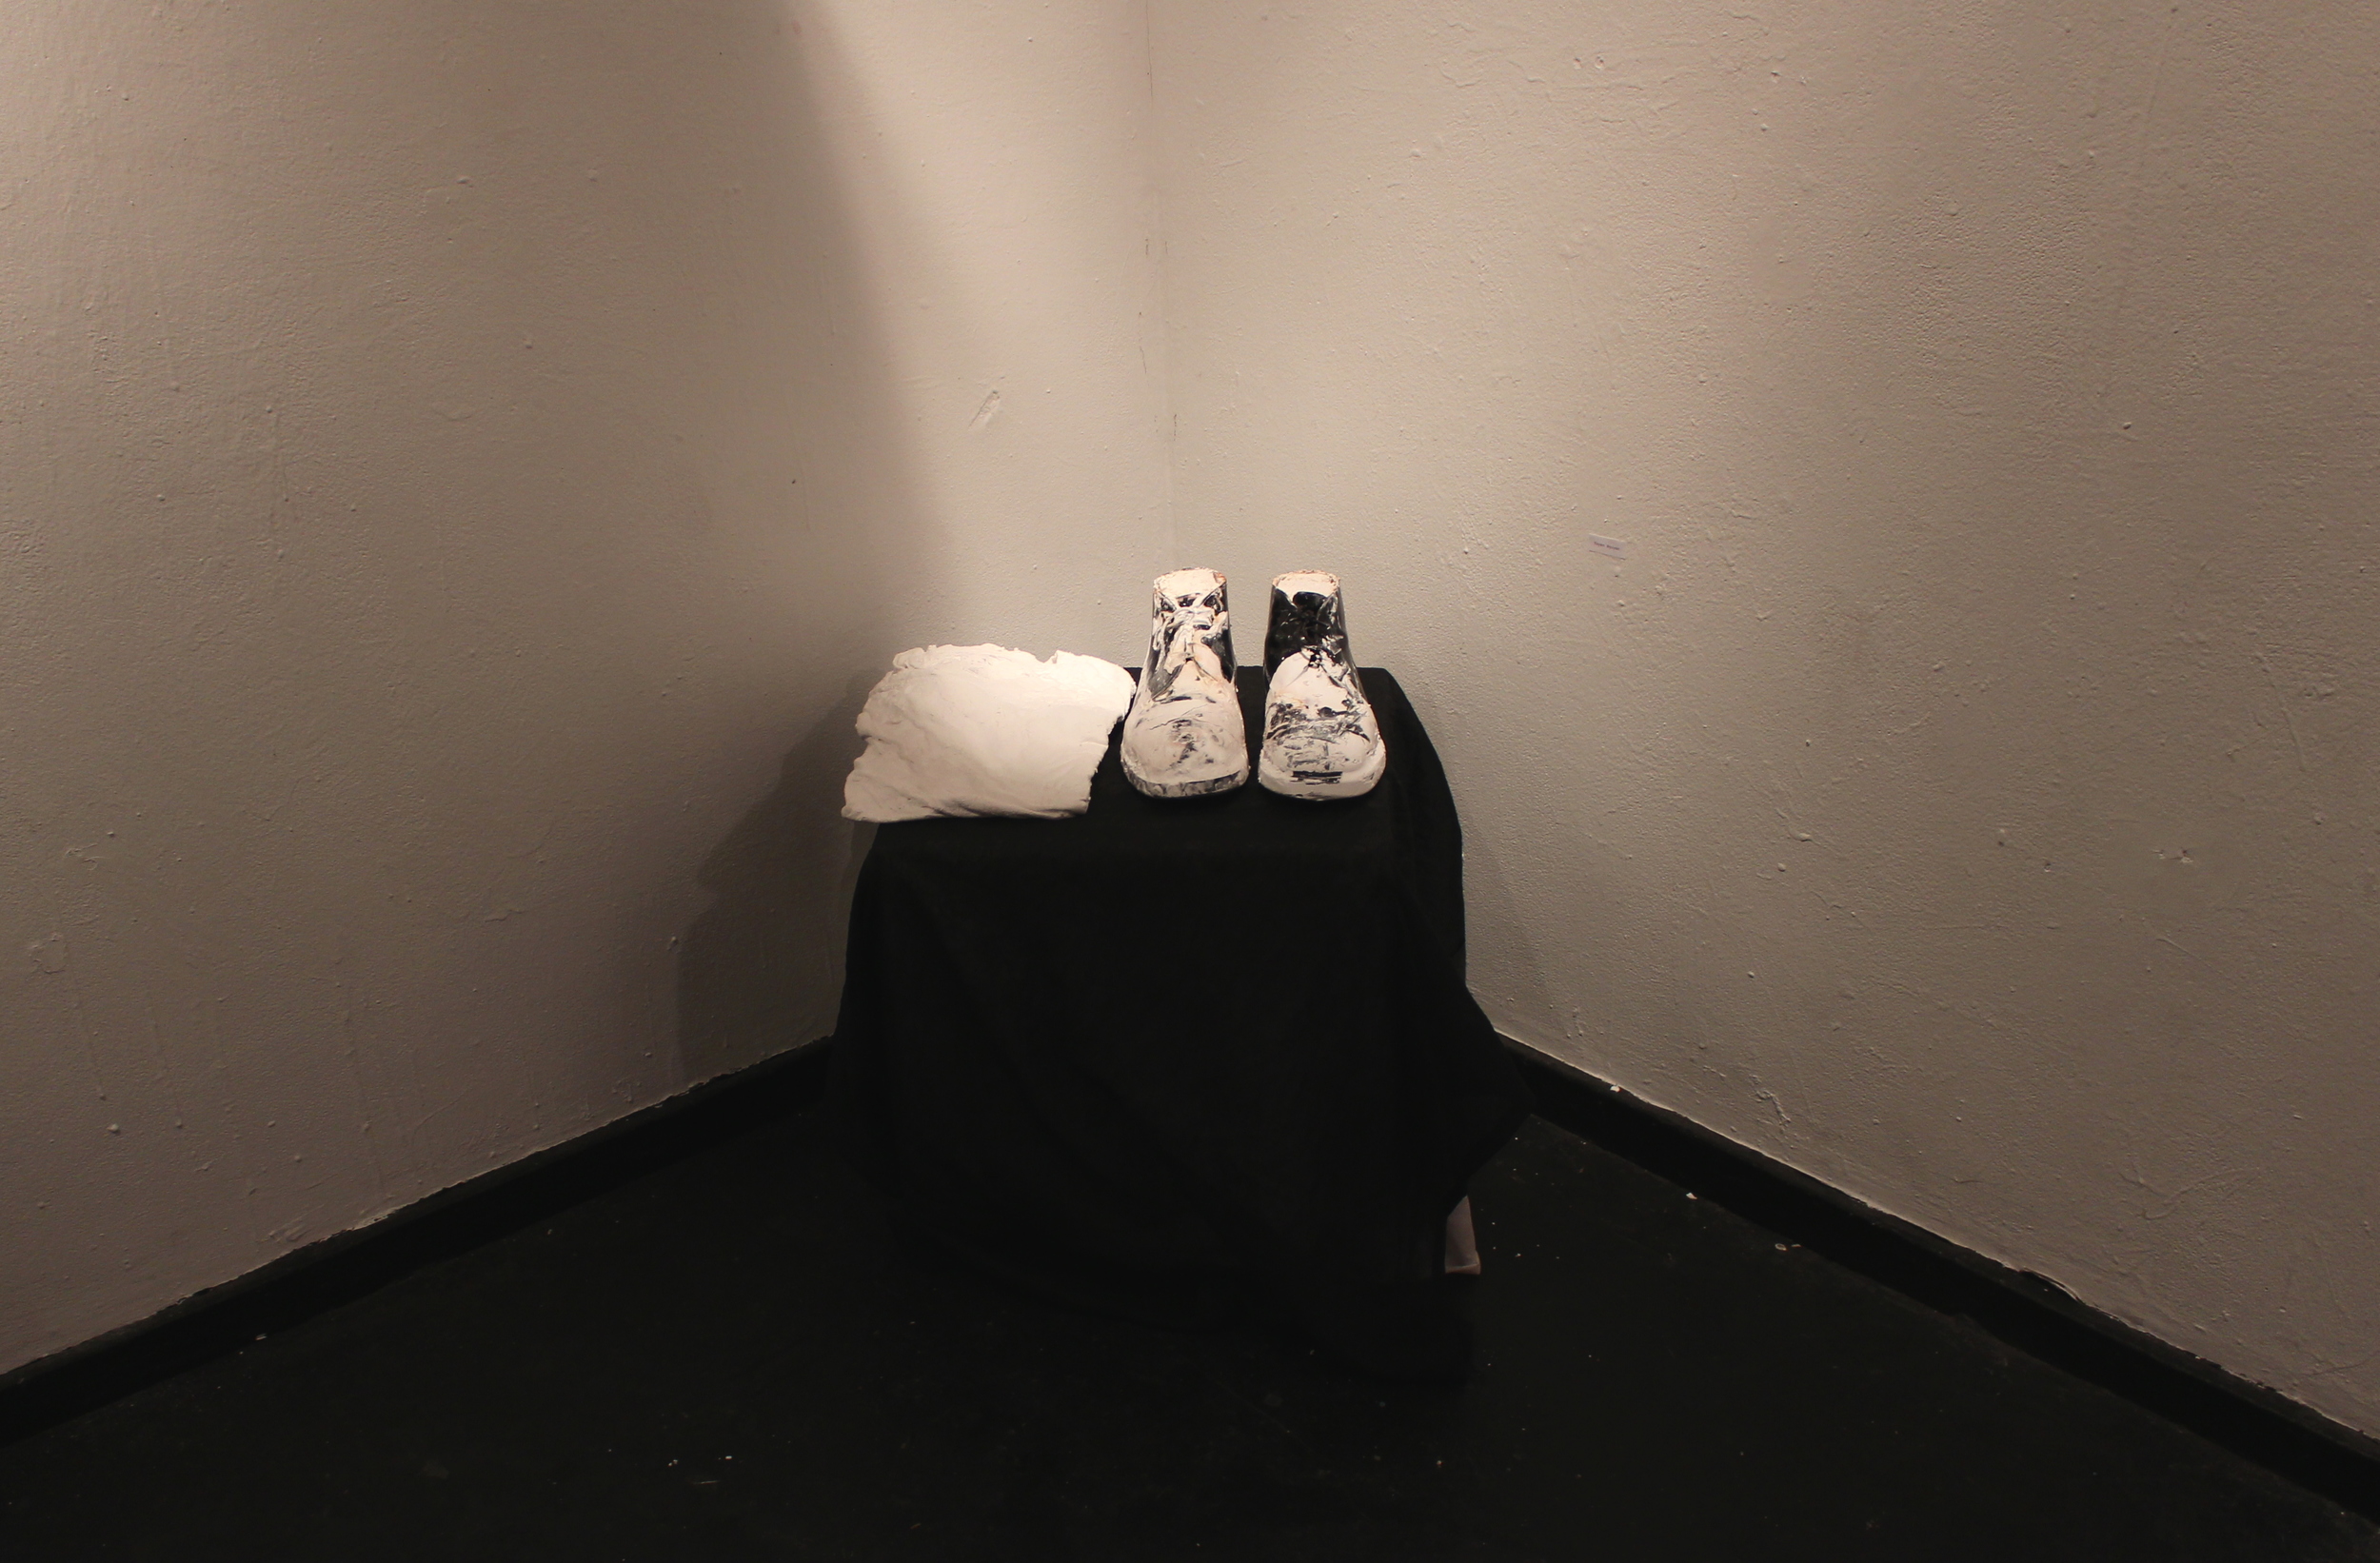   Cement filled shoes created by Tuyen Nguyen '17 quietly occupied a corner of the room. Photo by Lexie Brown '17  